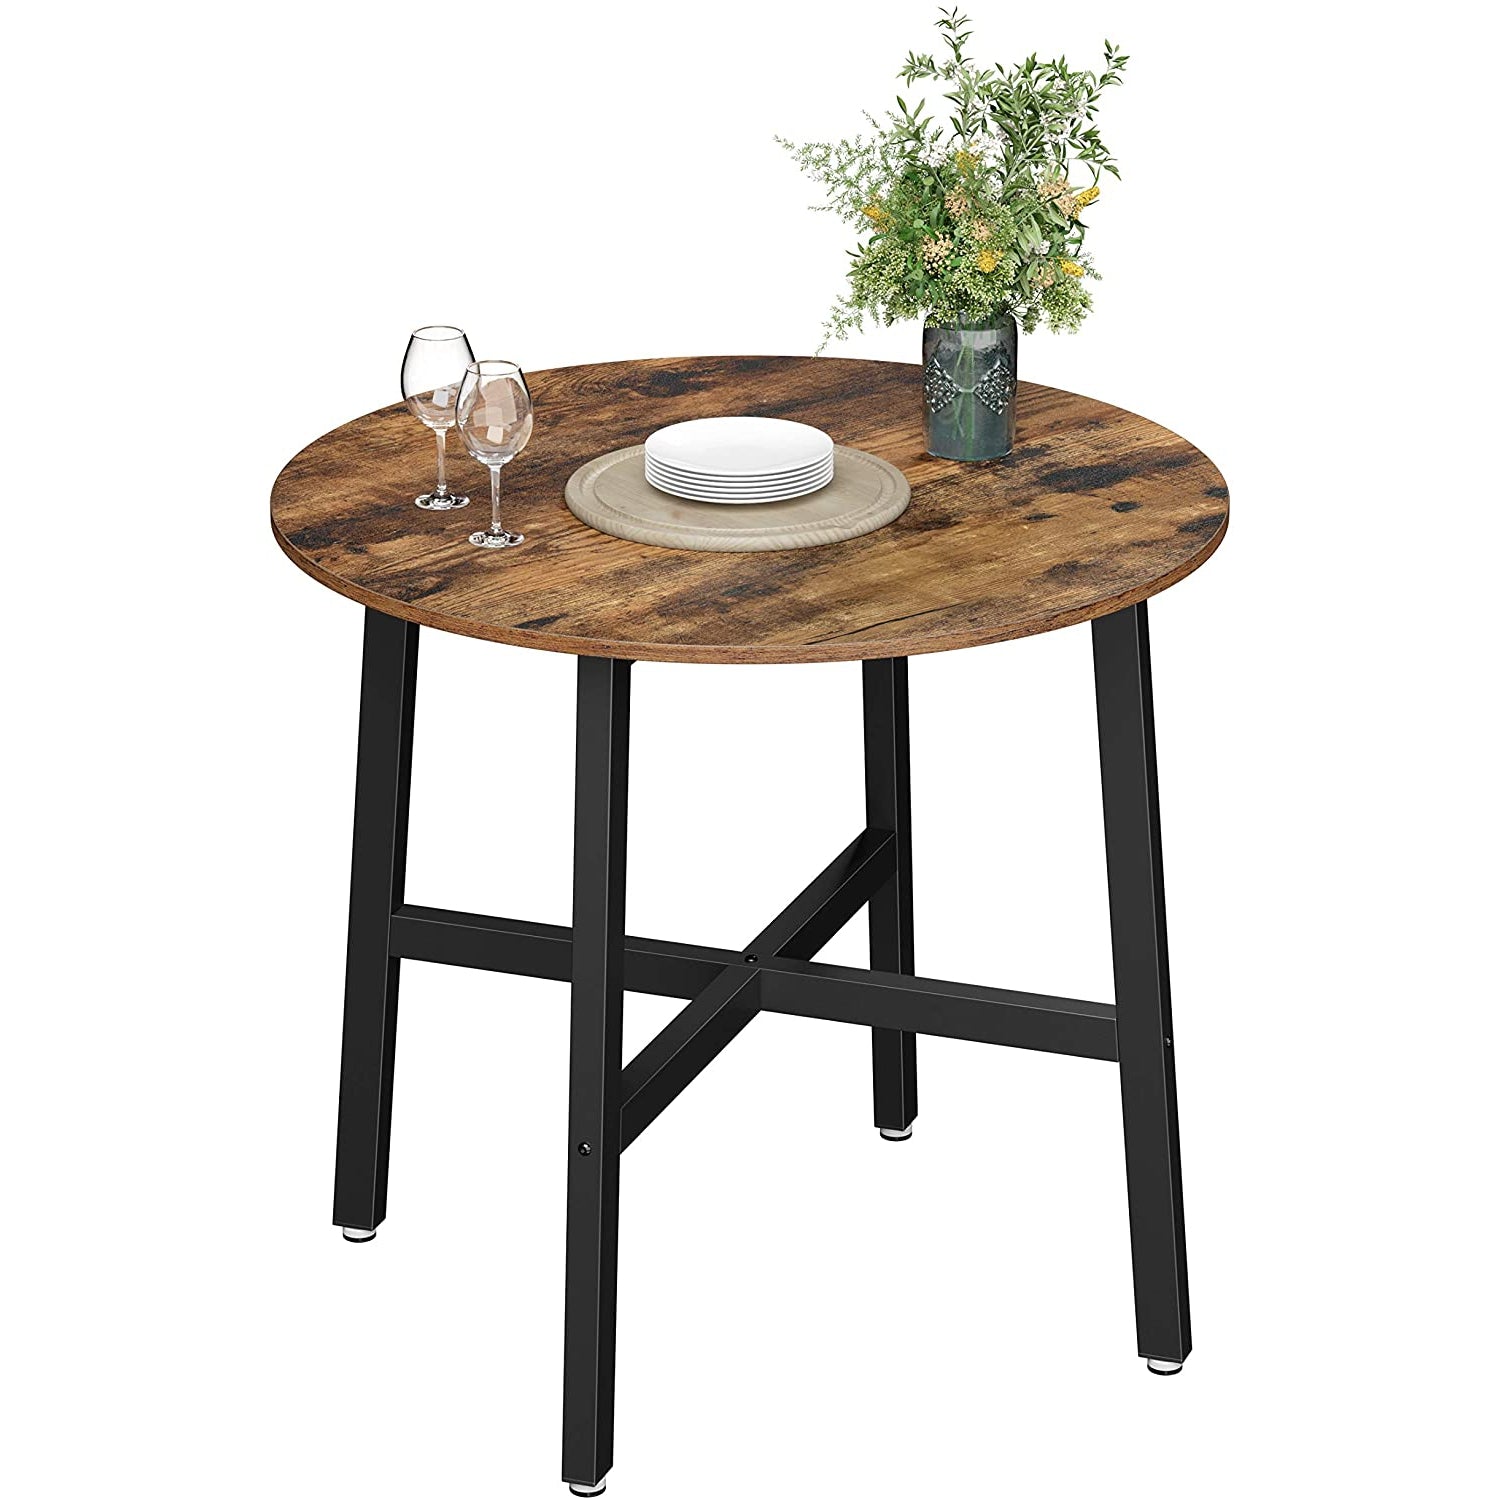 Nancy's Sparks Small dining table - Kitchen table - Industrial - 80 x 80 x 75 cm